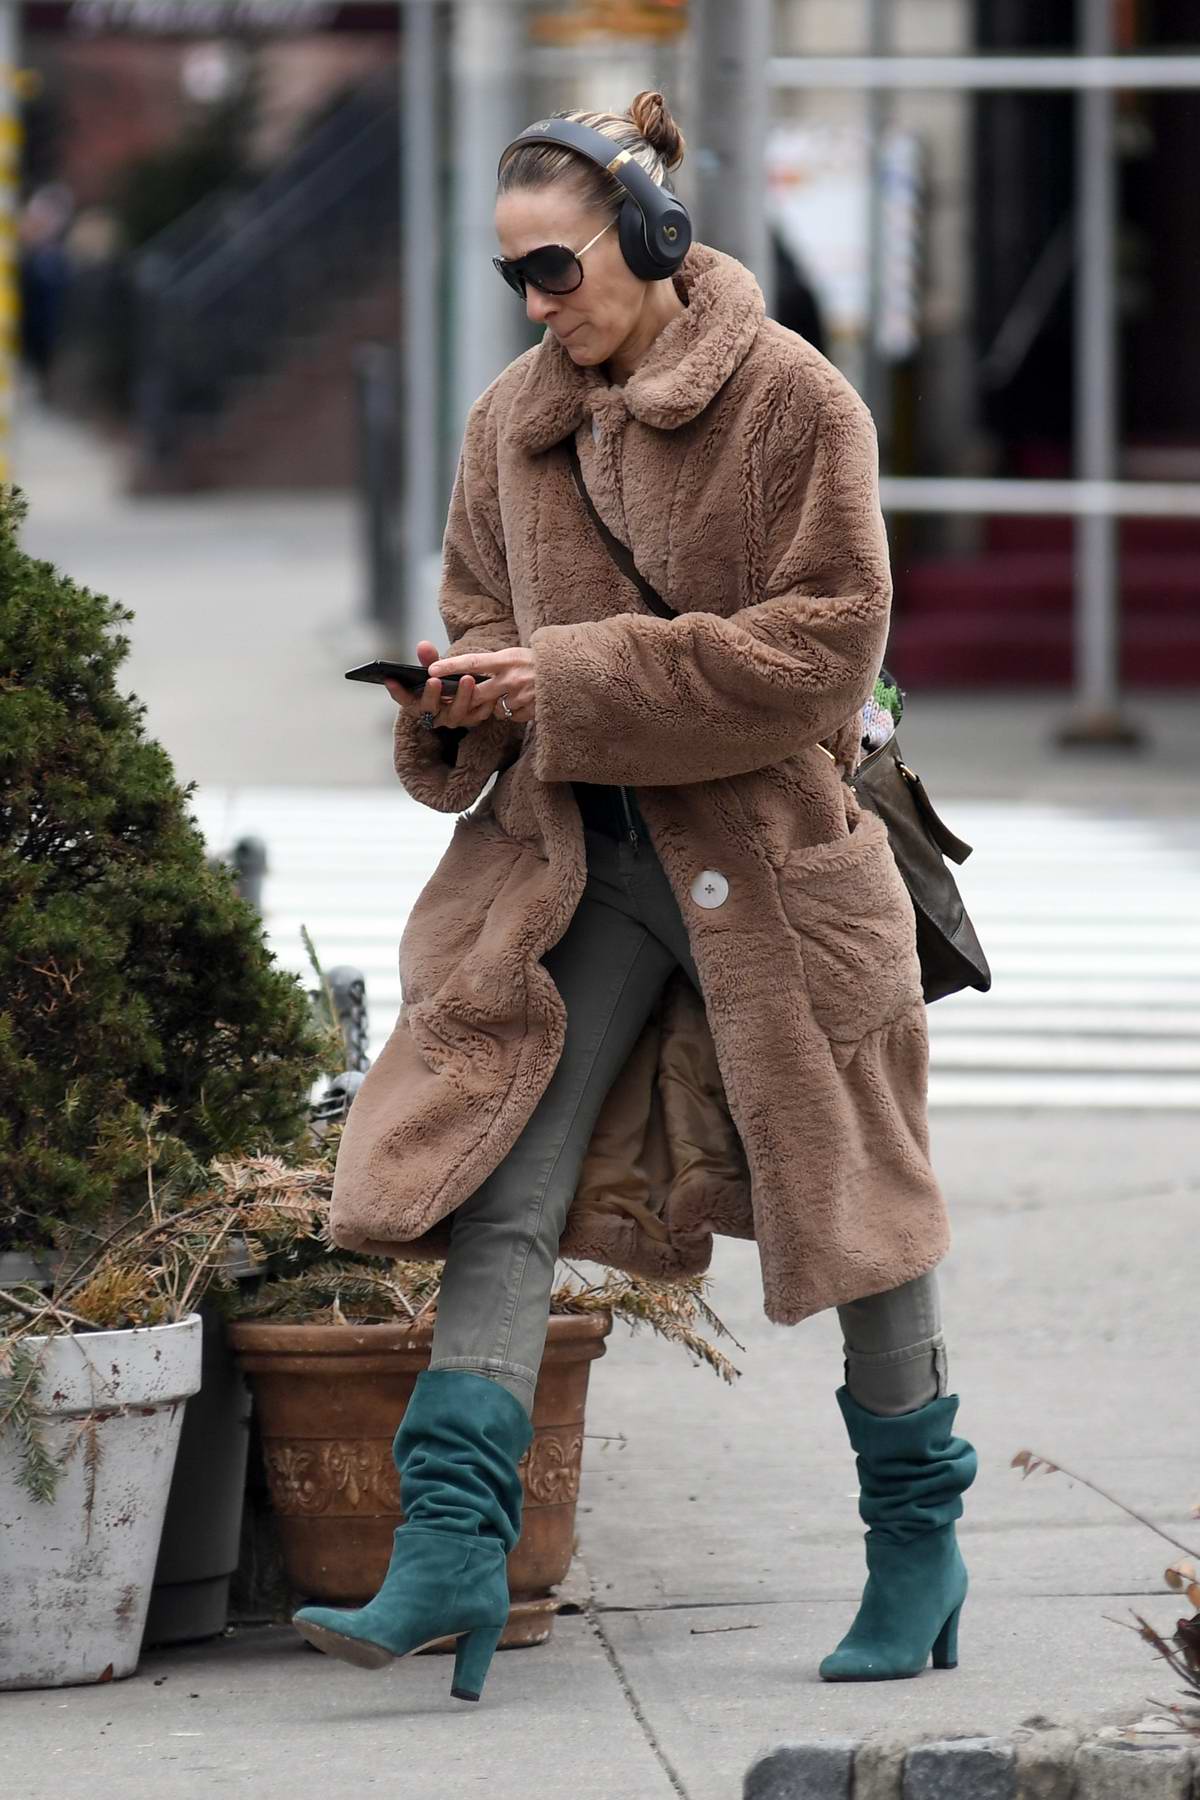 sarah jessica parker wearing headphones and a cozy brown coat